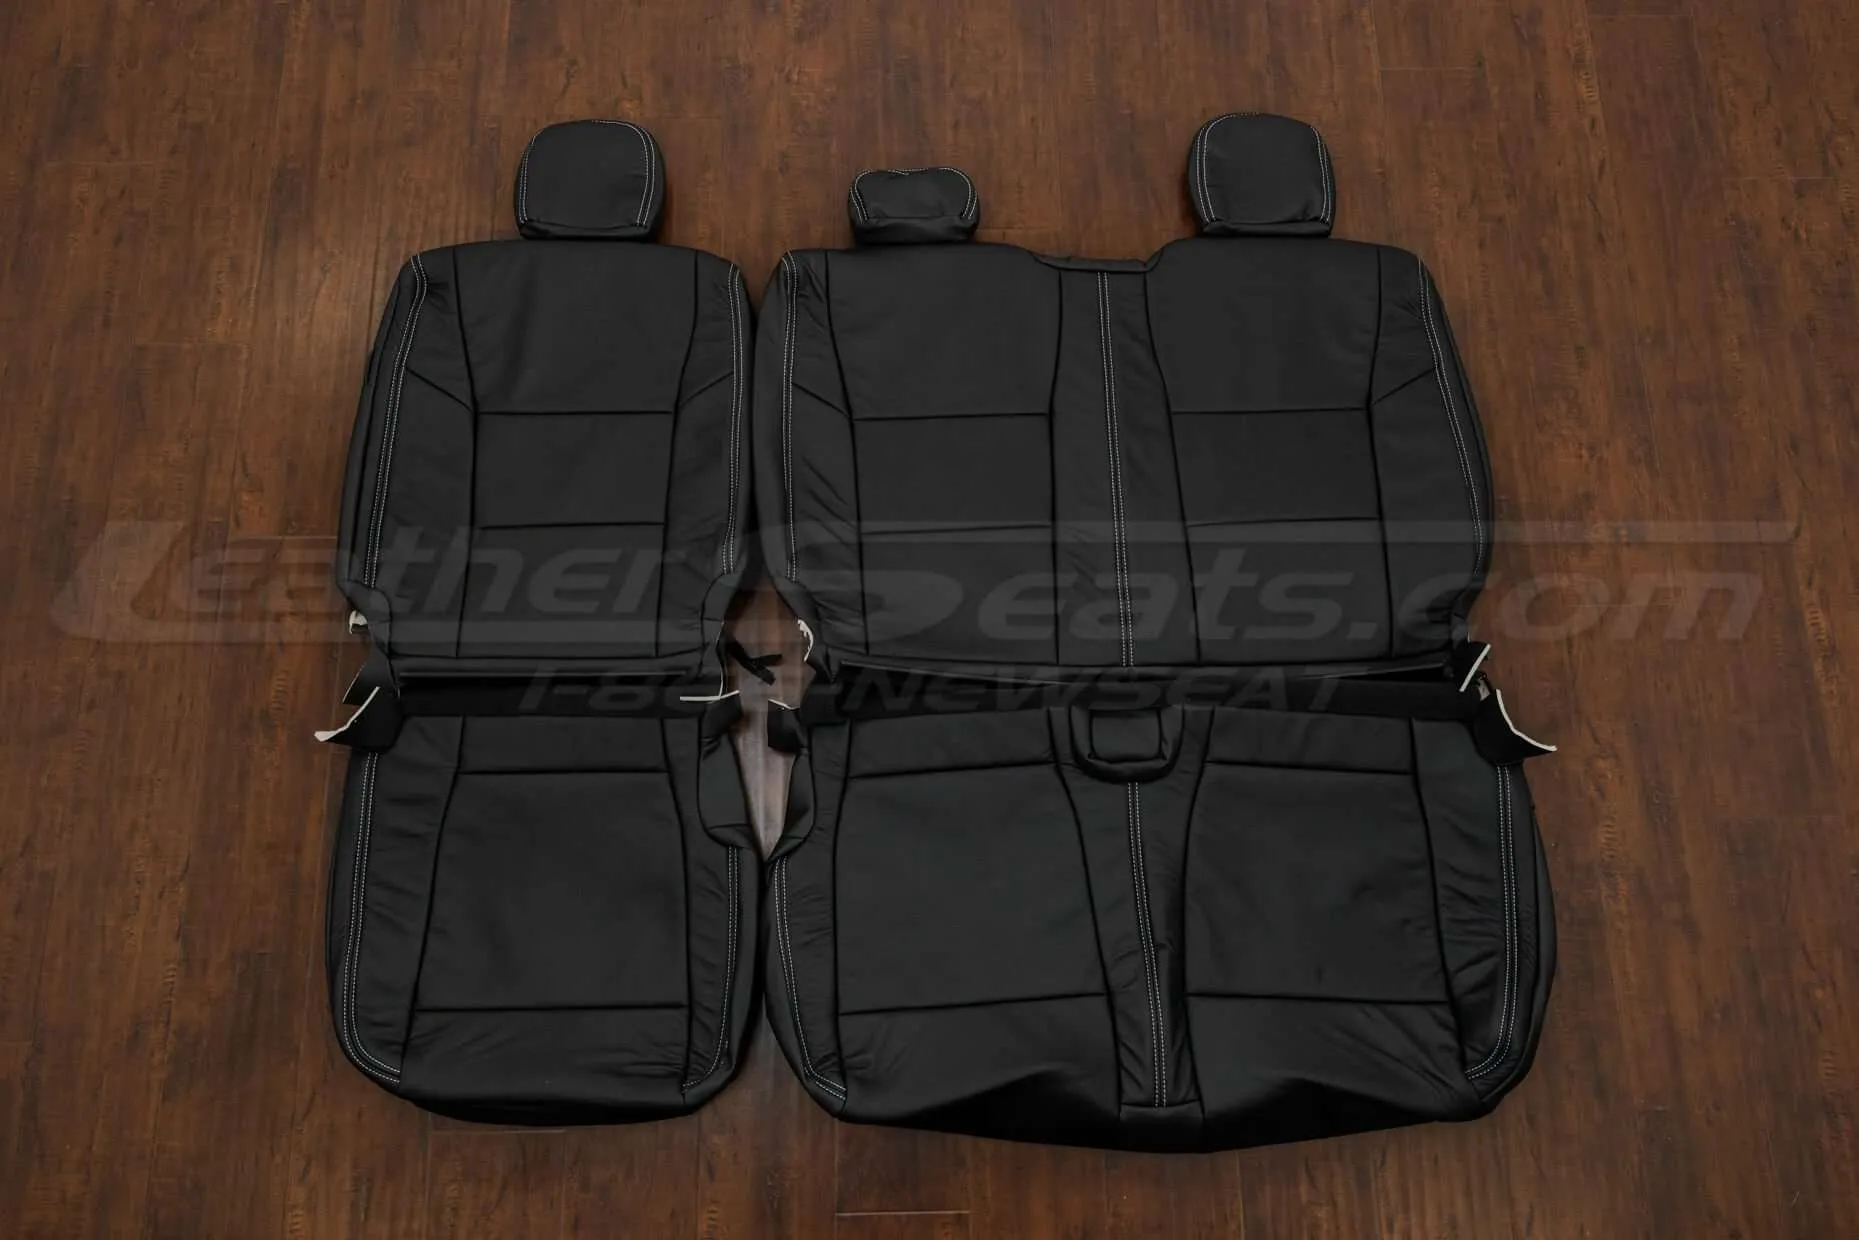 Ford F-350 Upholstery Kit - Black - Rear seats